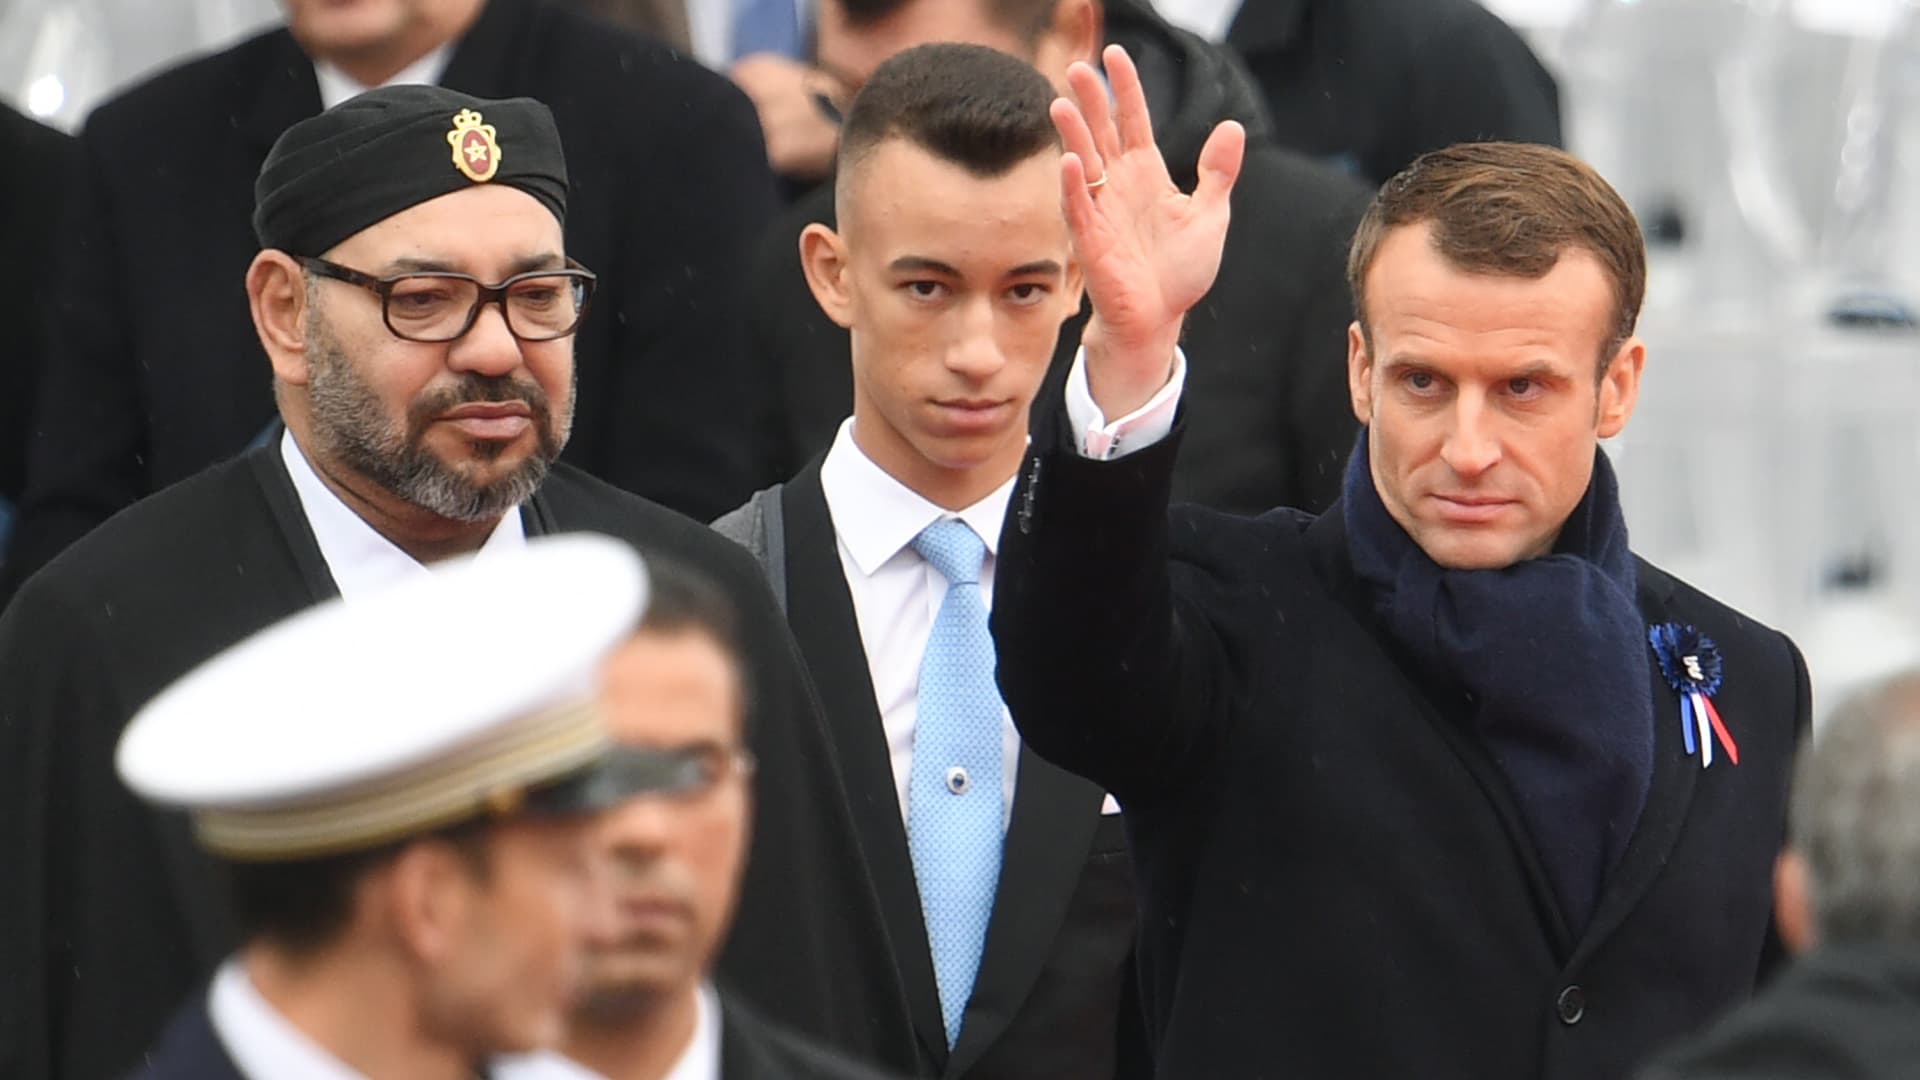 PARIS - French President Emmanuel Macron (R) waves as he leaves with Morocco's Prince Moulay Hassan (C) nd Moroccan King Mohammed VI (L) after attending a ceremony at the Arc de Triomphe in Paris on November 11, 2018.